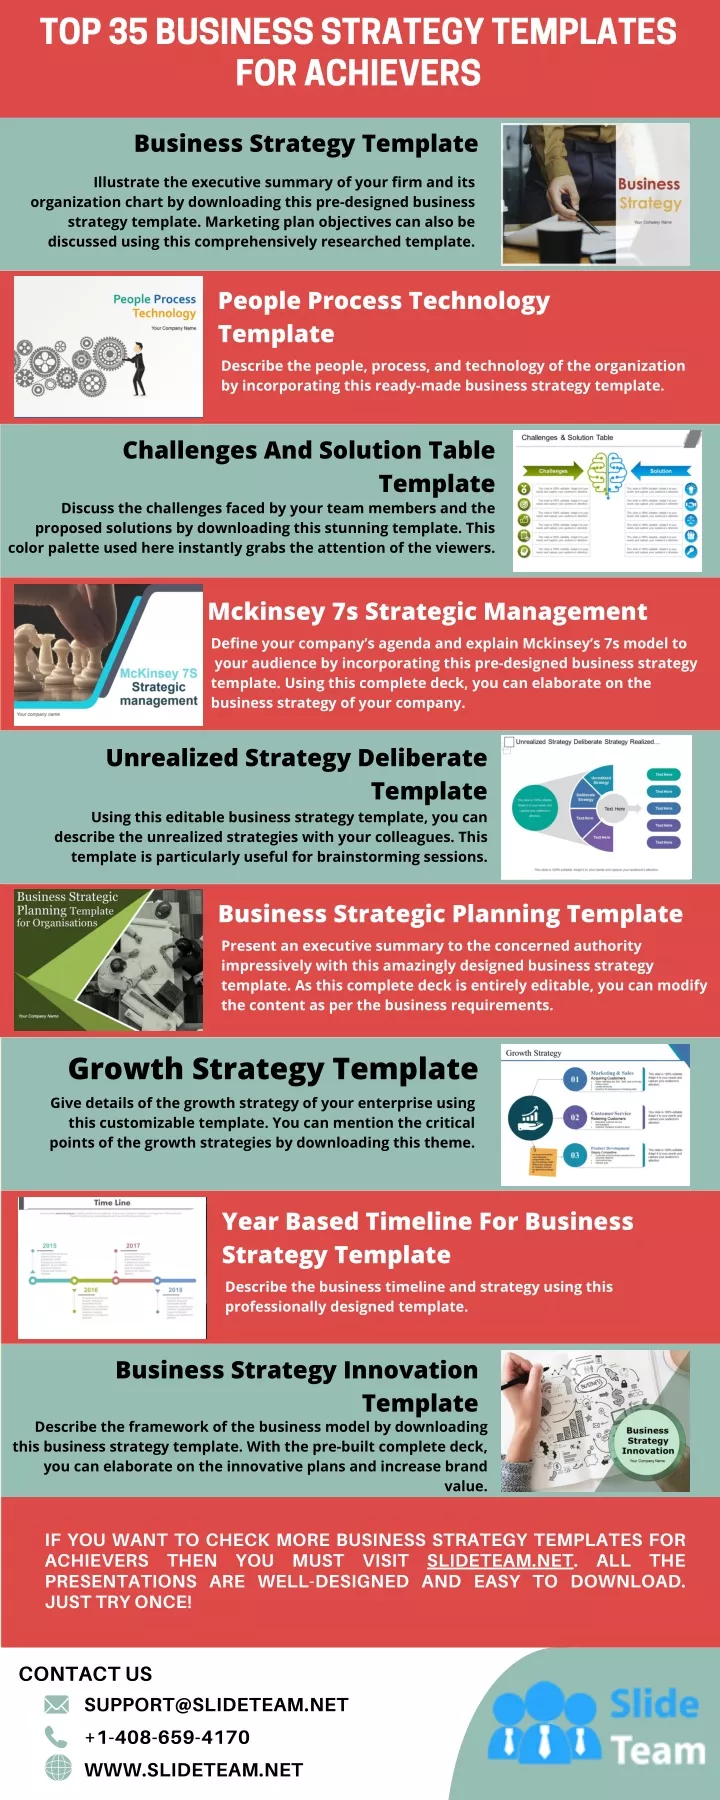 top 35 business strategy templates for achievers